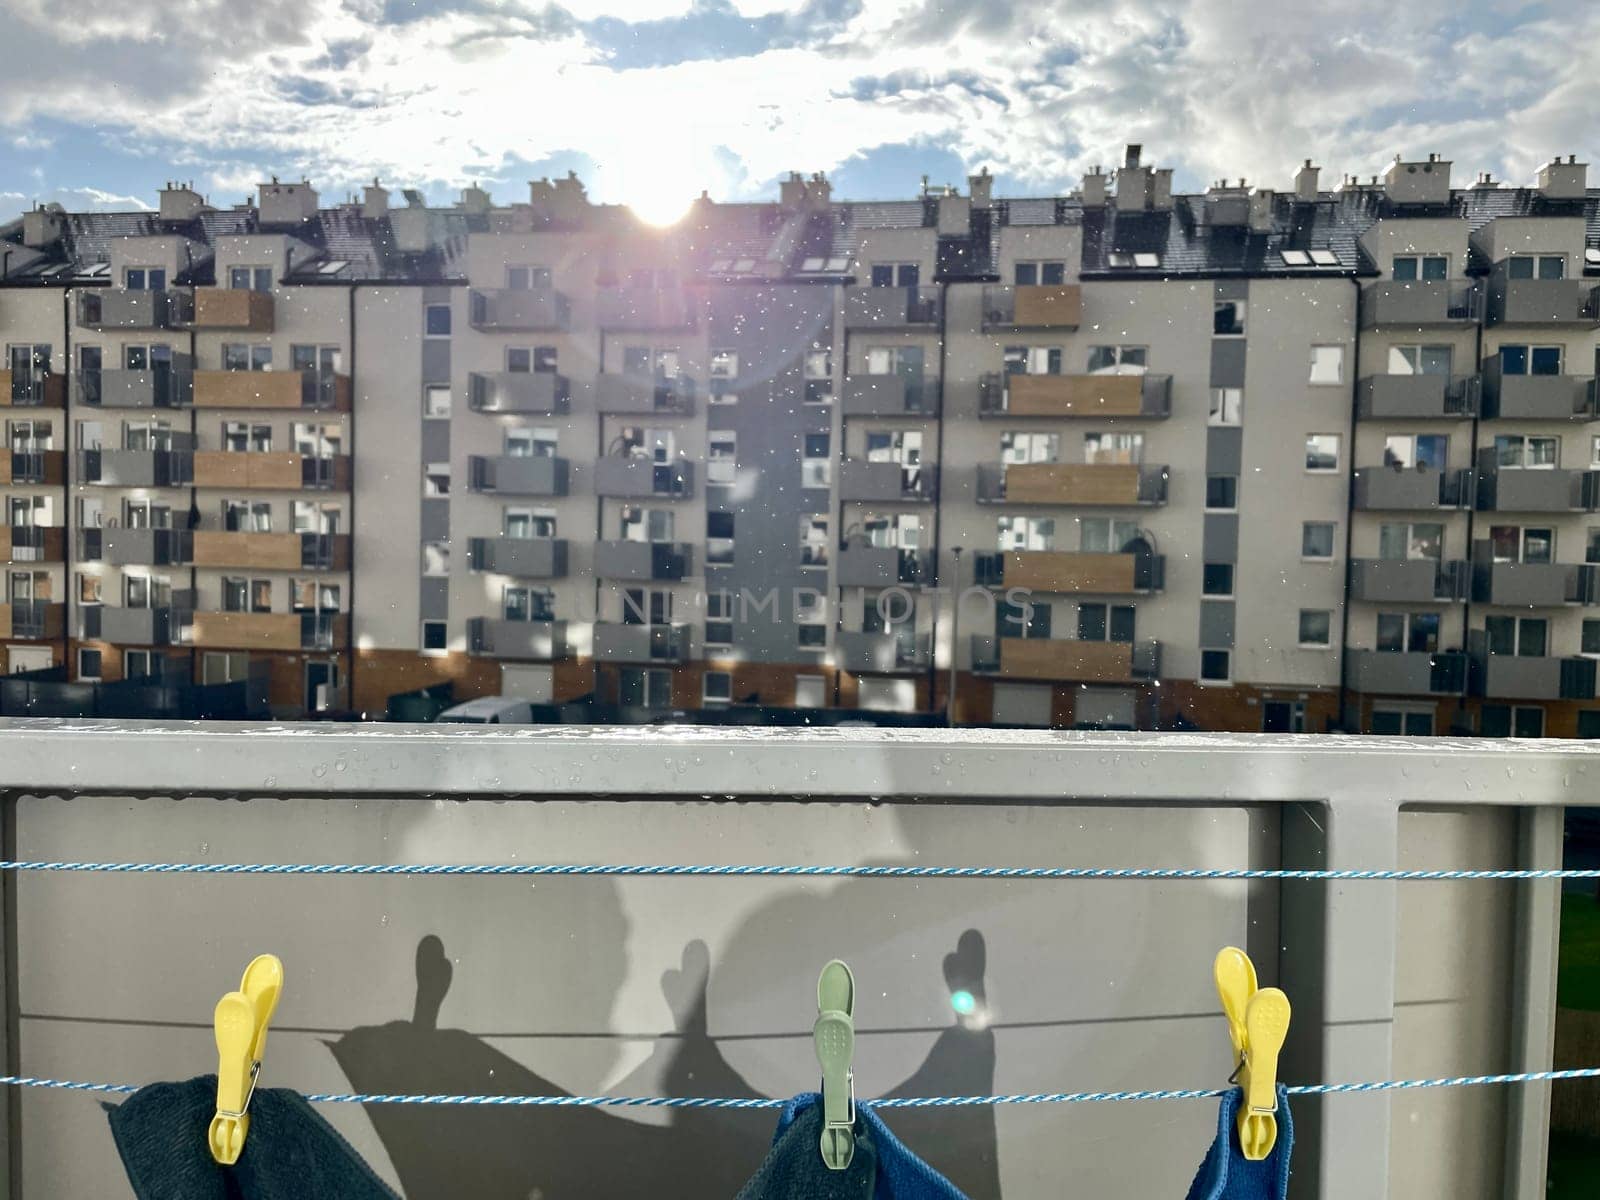 There is a rope with clothespins on the balcony, the bright sun is shining between the houses and the rain is falling. High quality photo